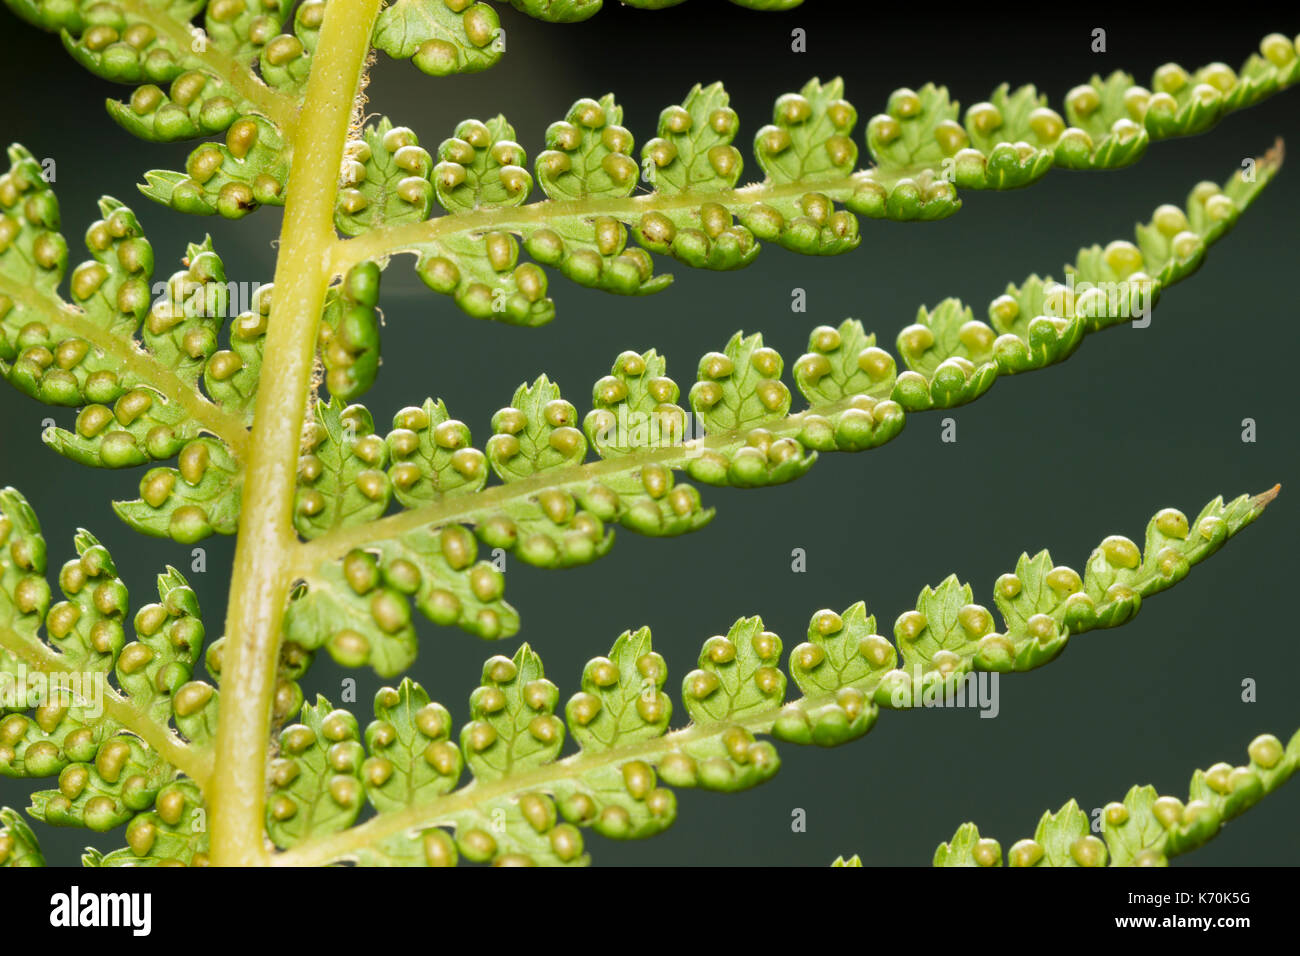 Spores in the sporangia on the underside of the fronds of Dicksonia antarctica, a hardy evergreen tree fern Stock Photo